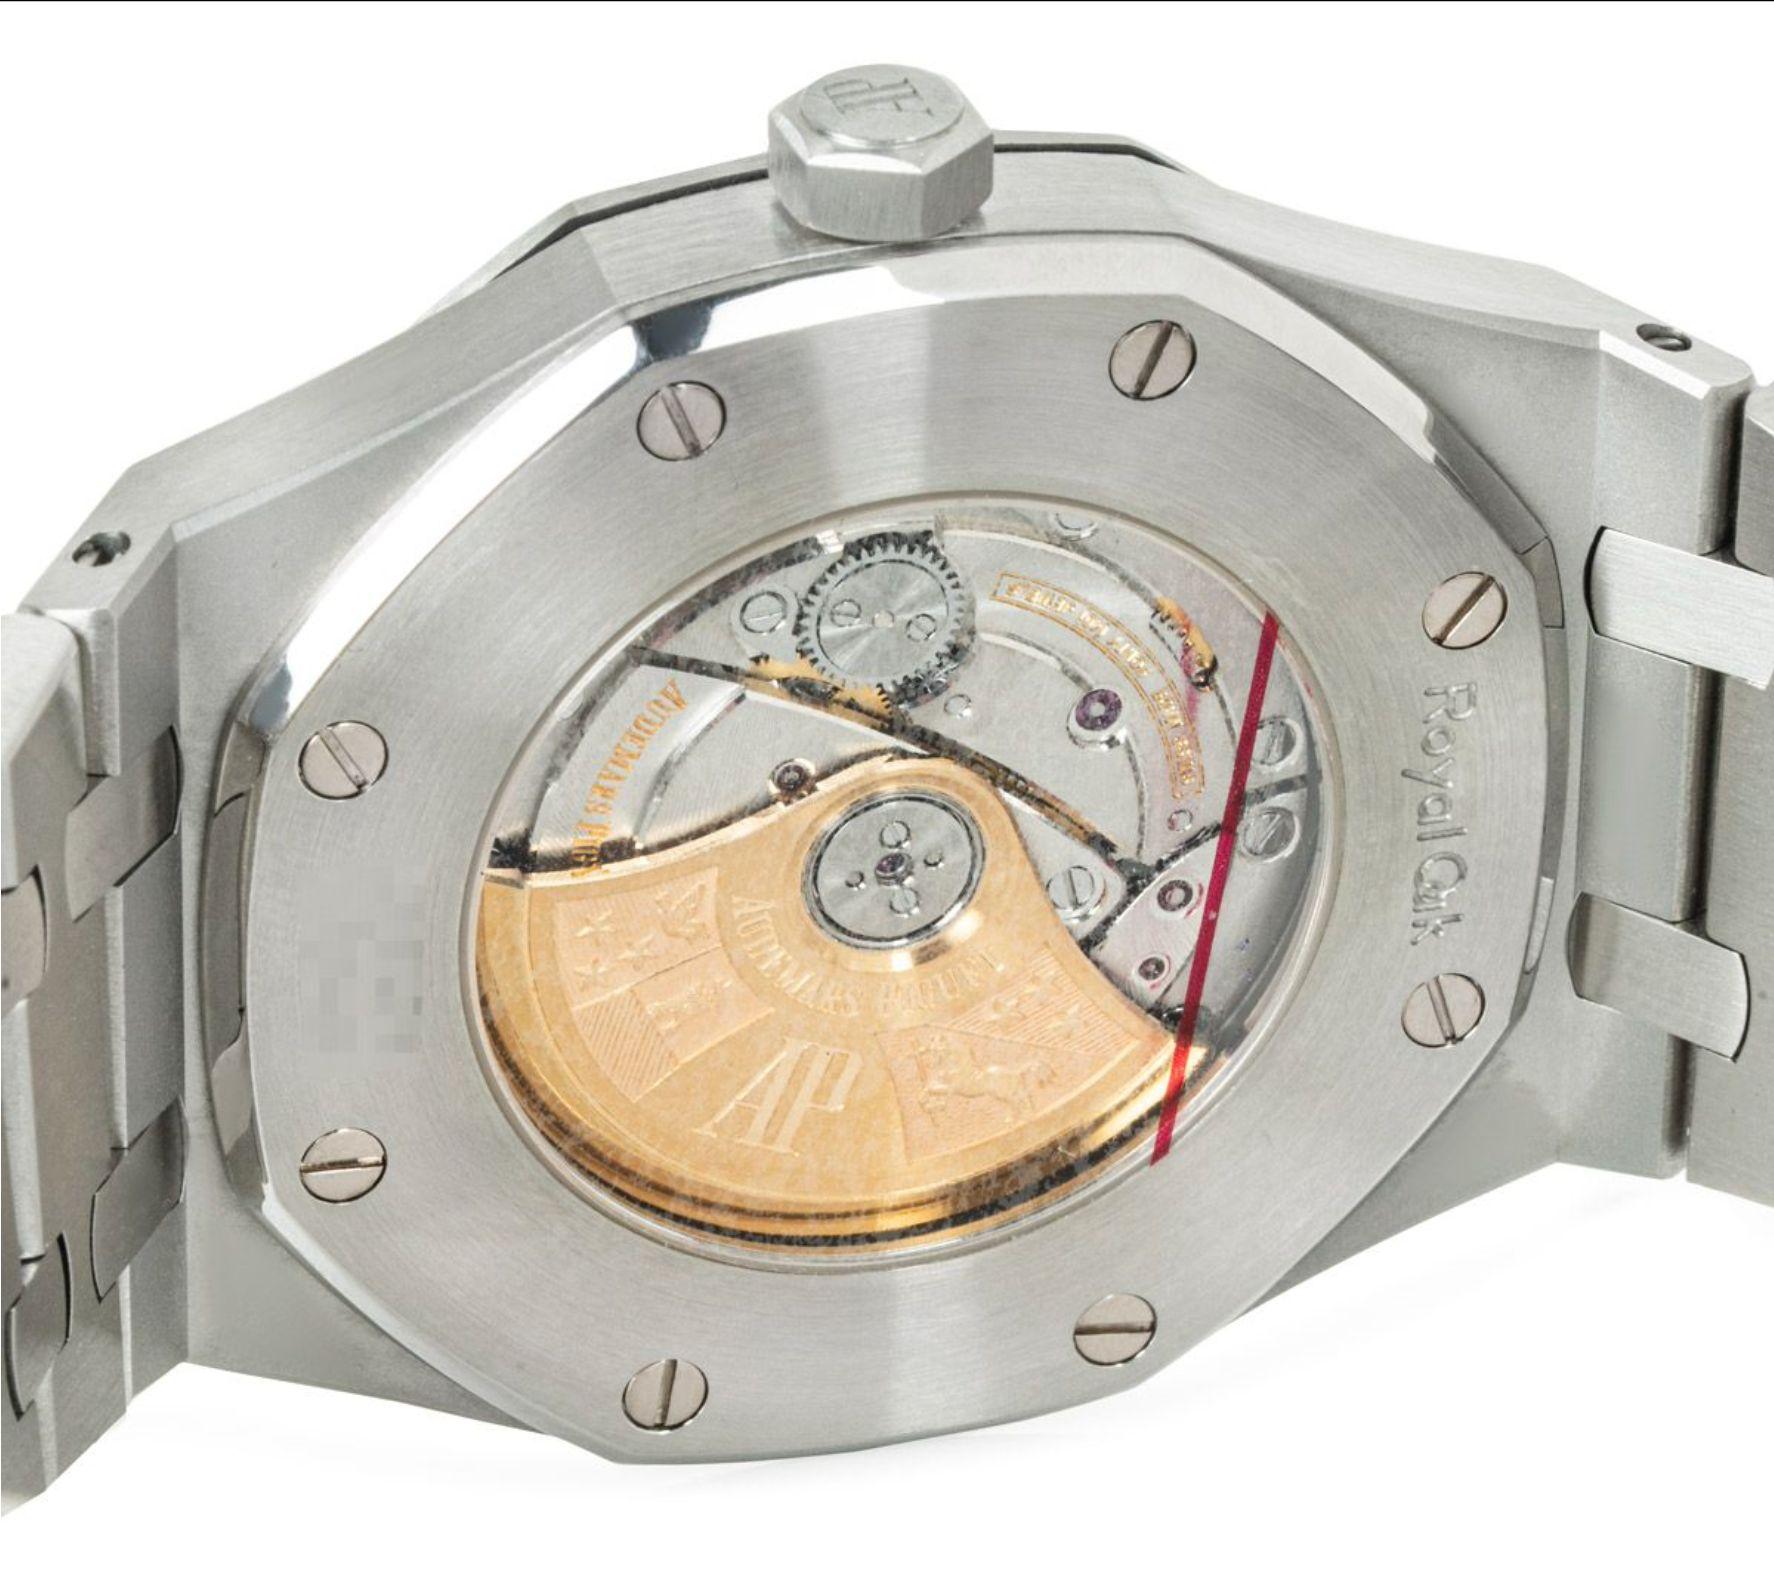 Audemars Piguet Royal Oak 15400ST.OO.1220ST.02 Watch In Excellent Condition In London, GB